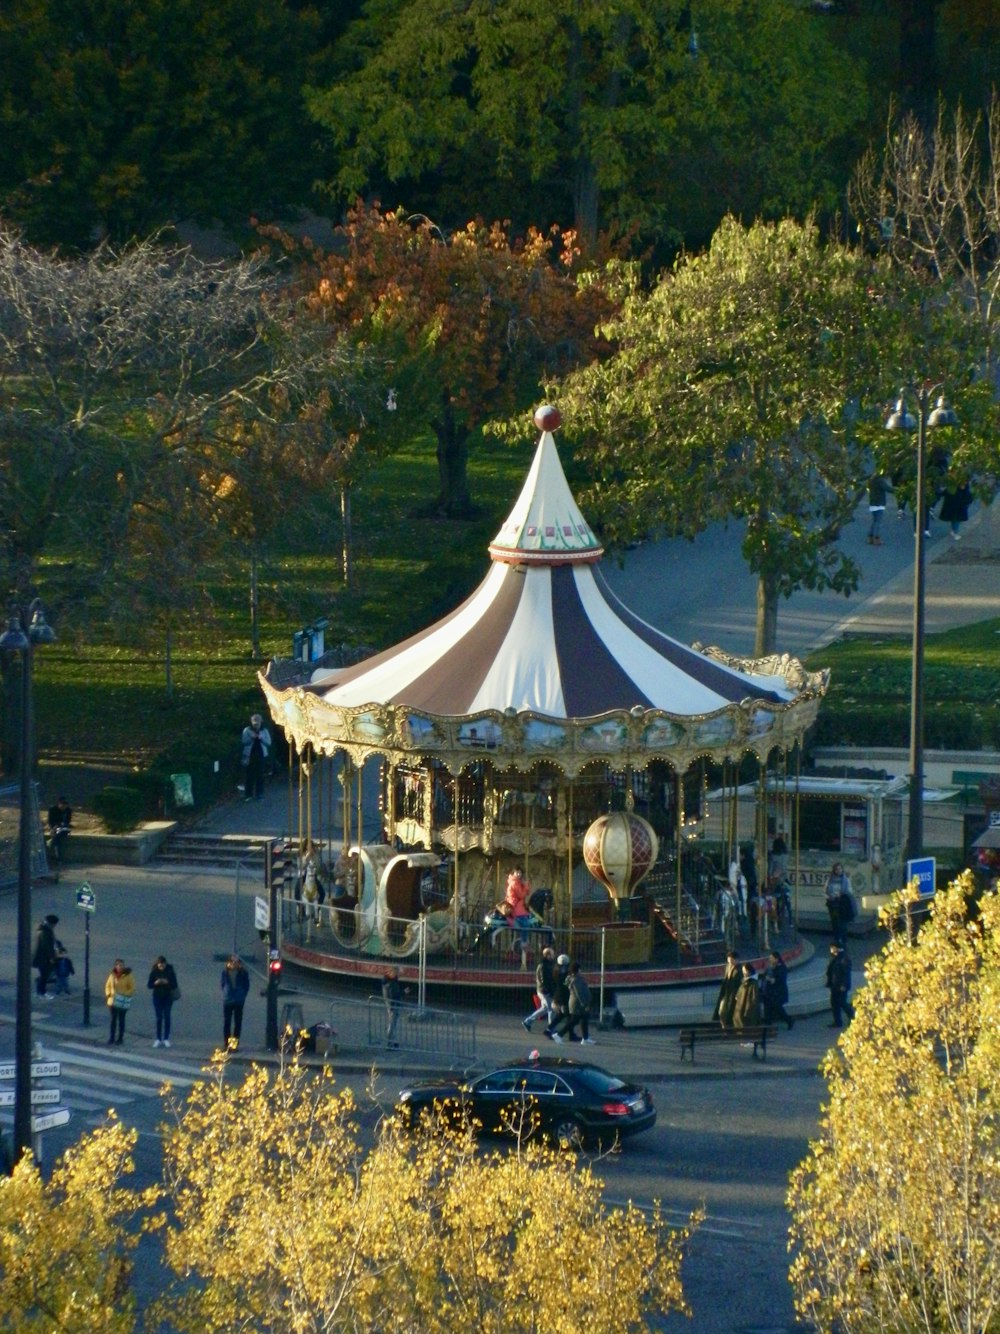 a carousel in the middle of a park surrounded by trees